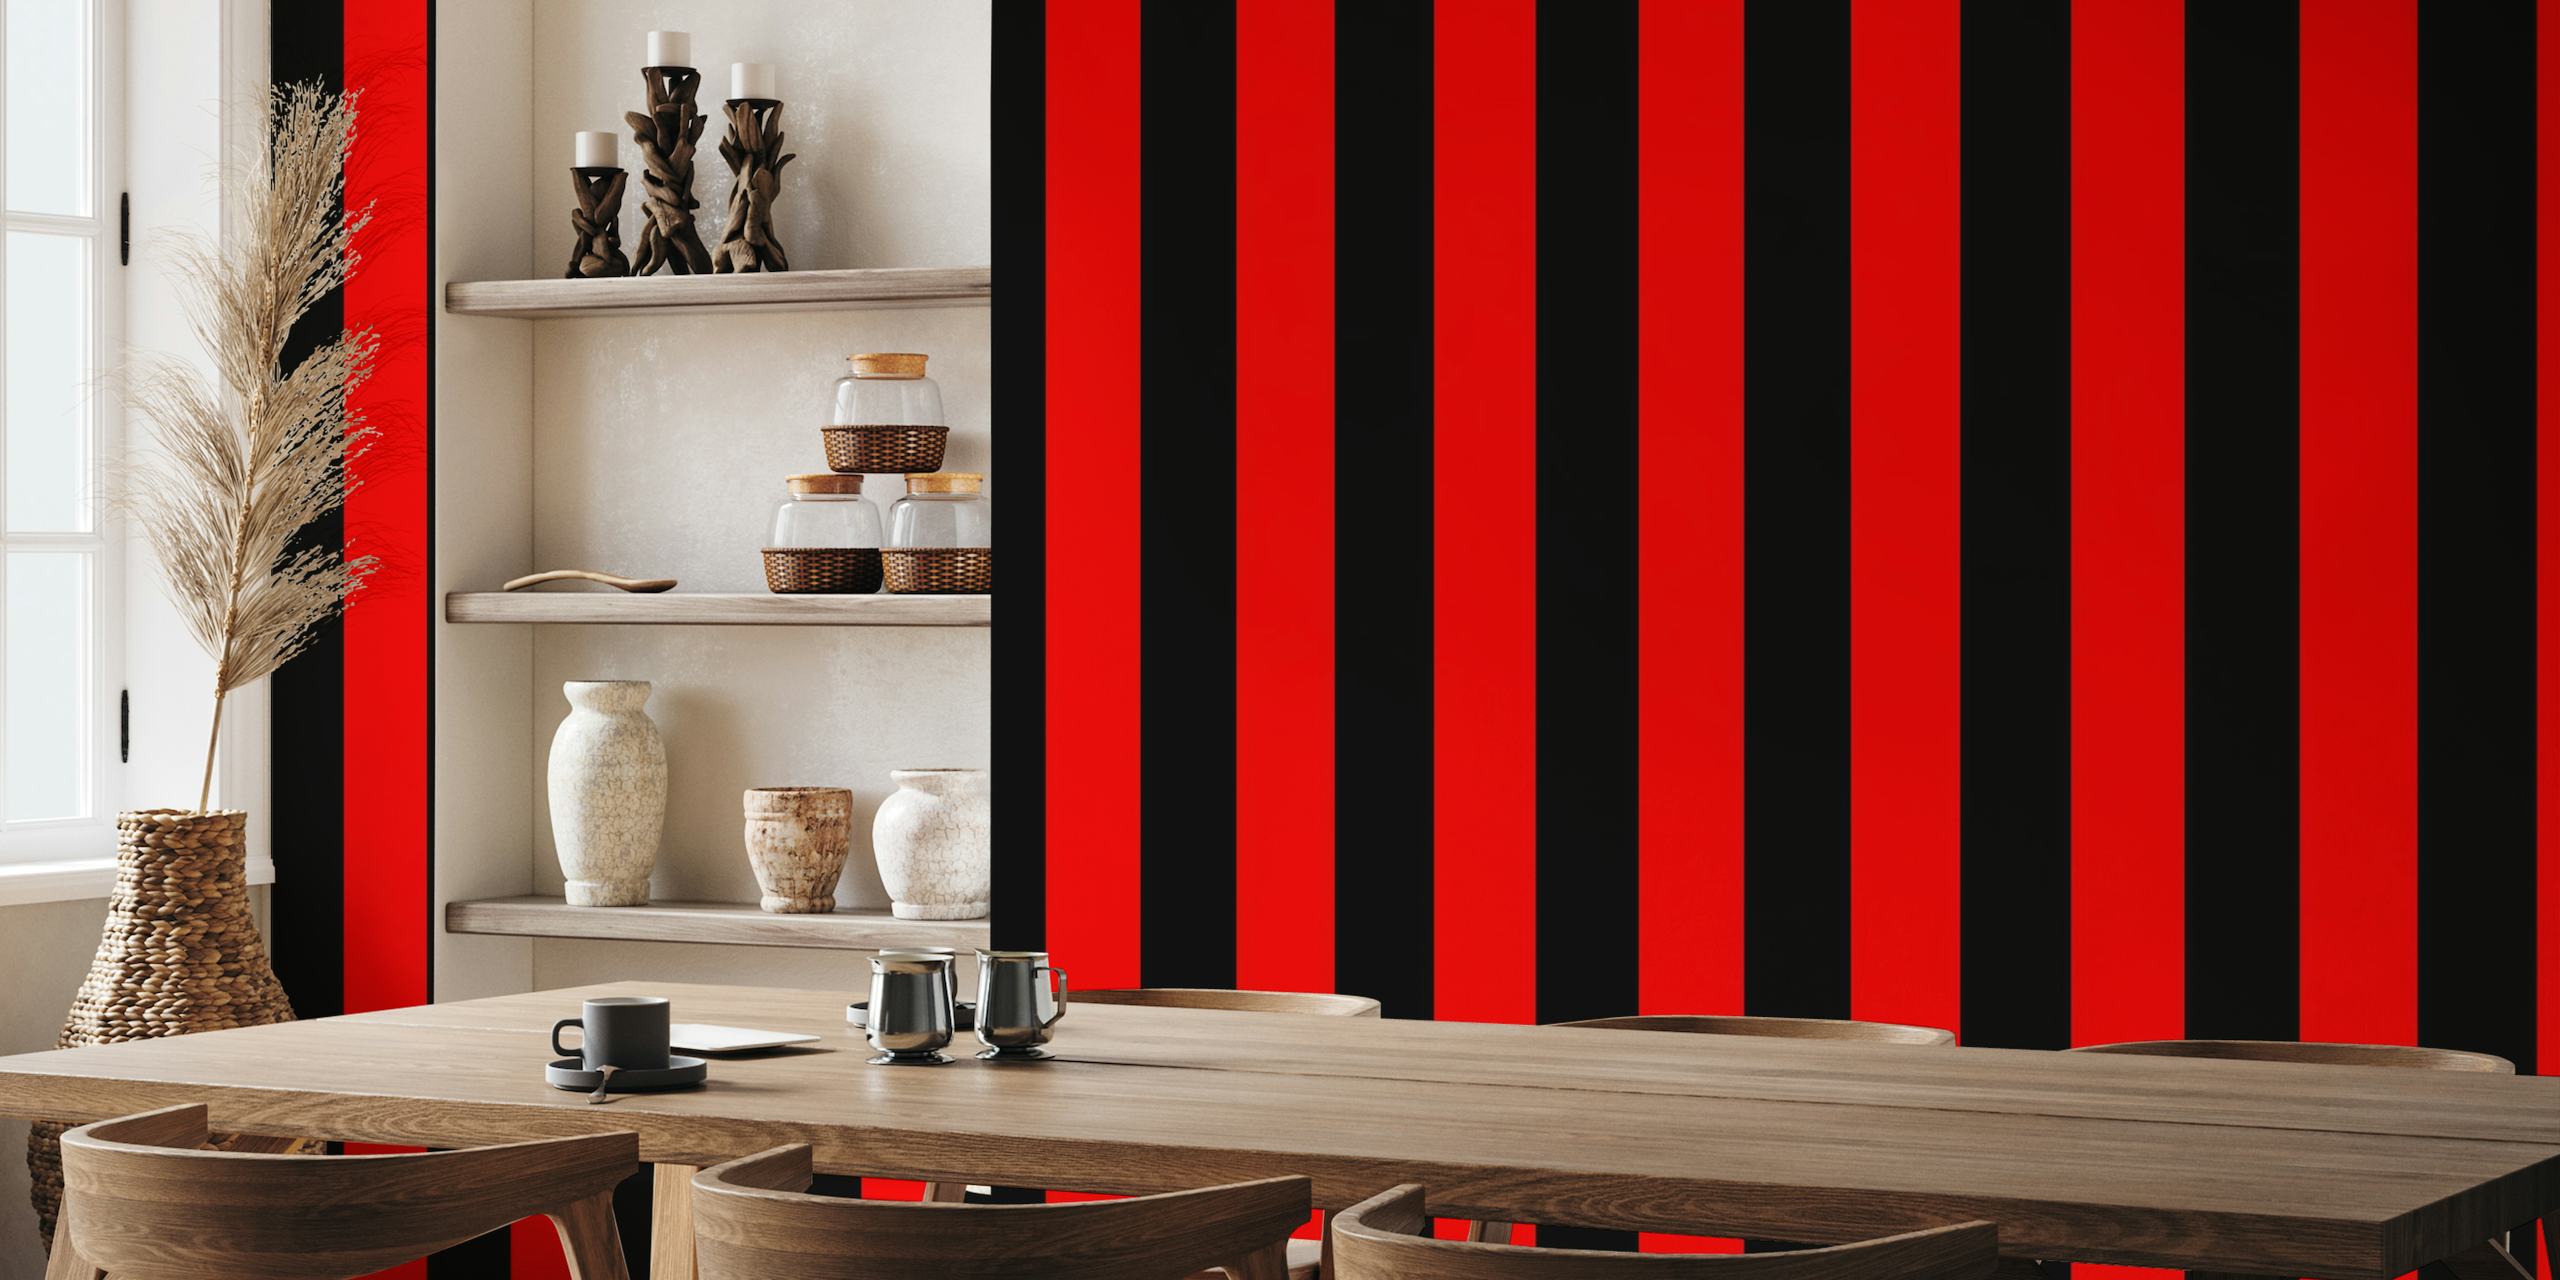 Abstract Black and Red Stripes Wall Mural Design